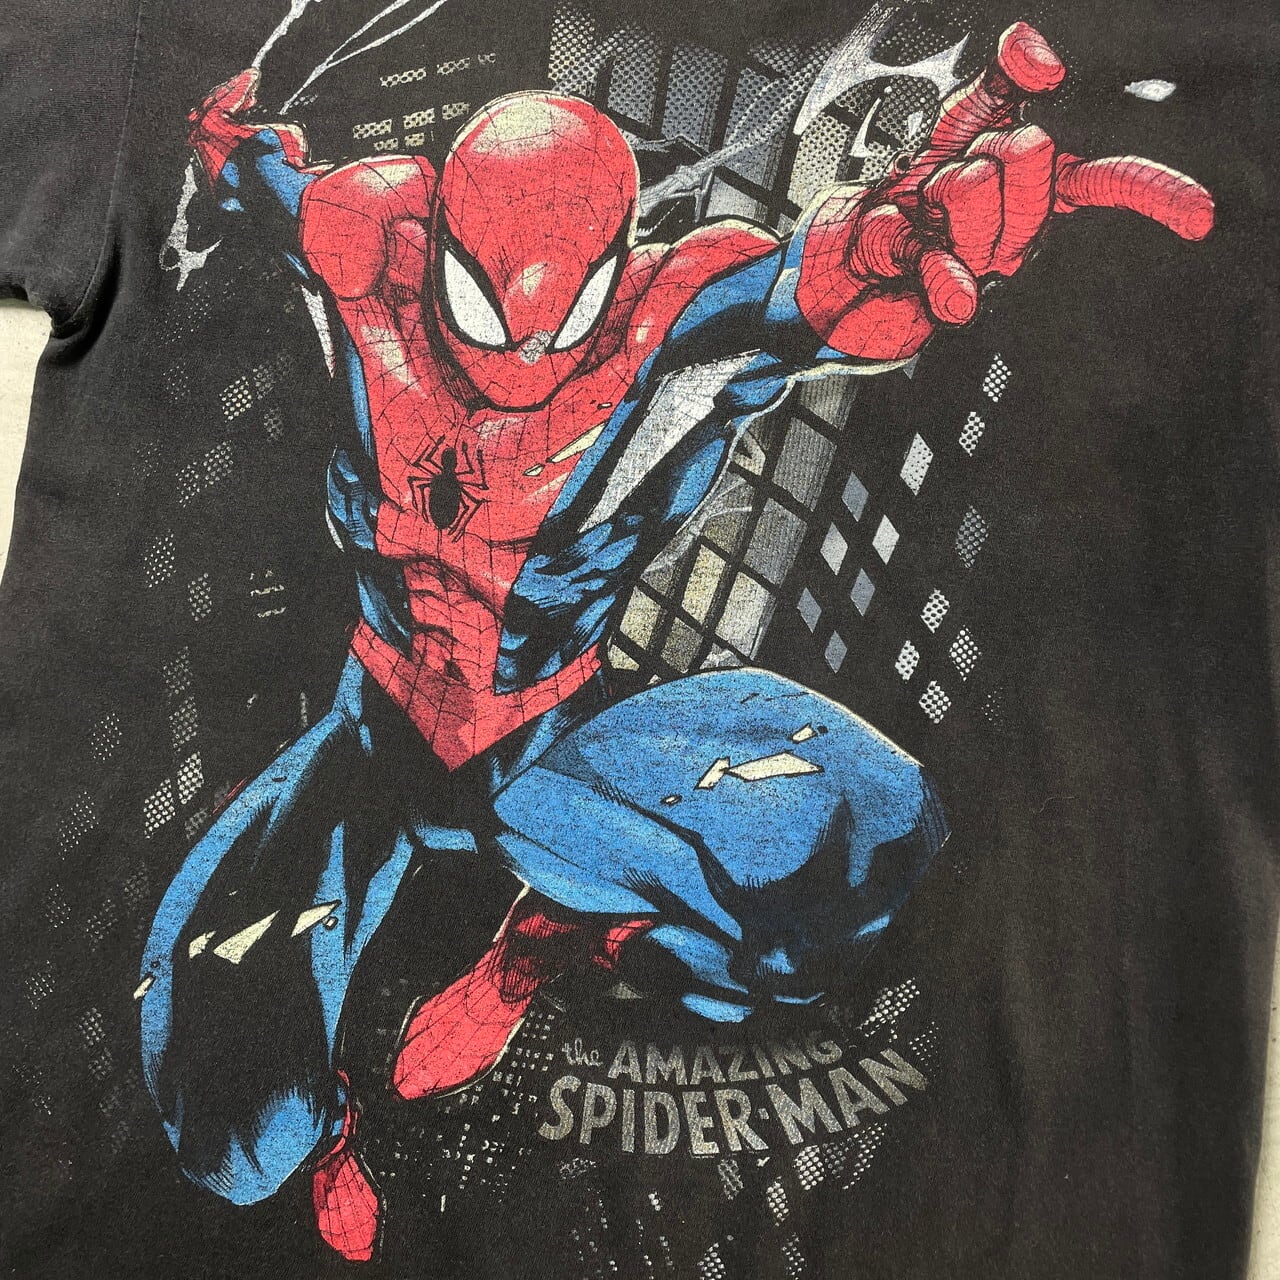 MARVEL SPIDER-MAN スパイダーマン キャラクタープリント Tシャツ メンズL 古着 マーベル 映画 ムービー コミック アメコミ  フェードブラック 黒【Tシャツ】【PS2307T】 | cave 古着屋【公式】古着通販サイト powered by BASE